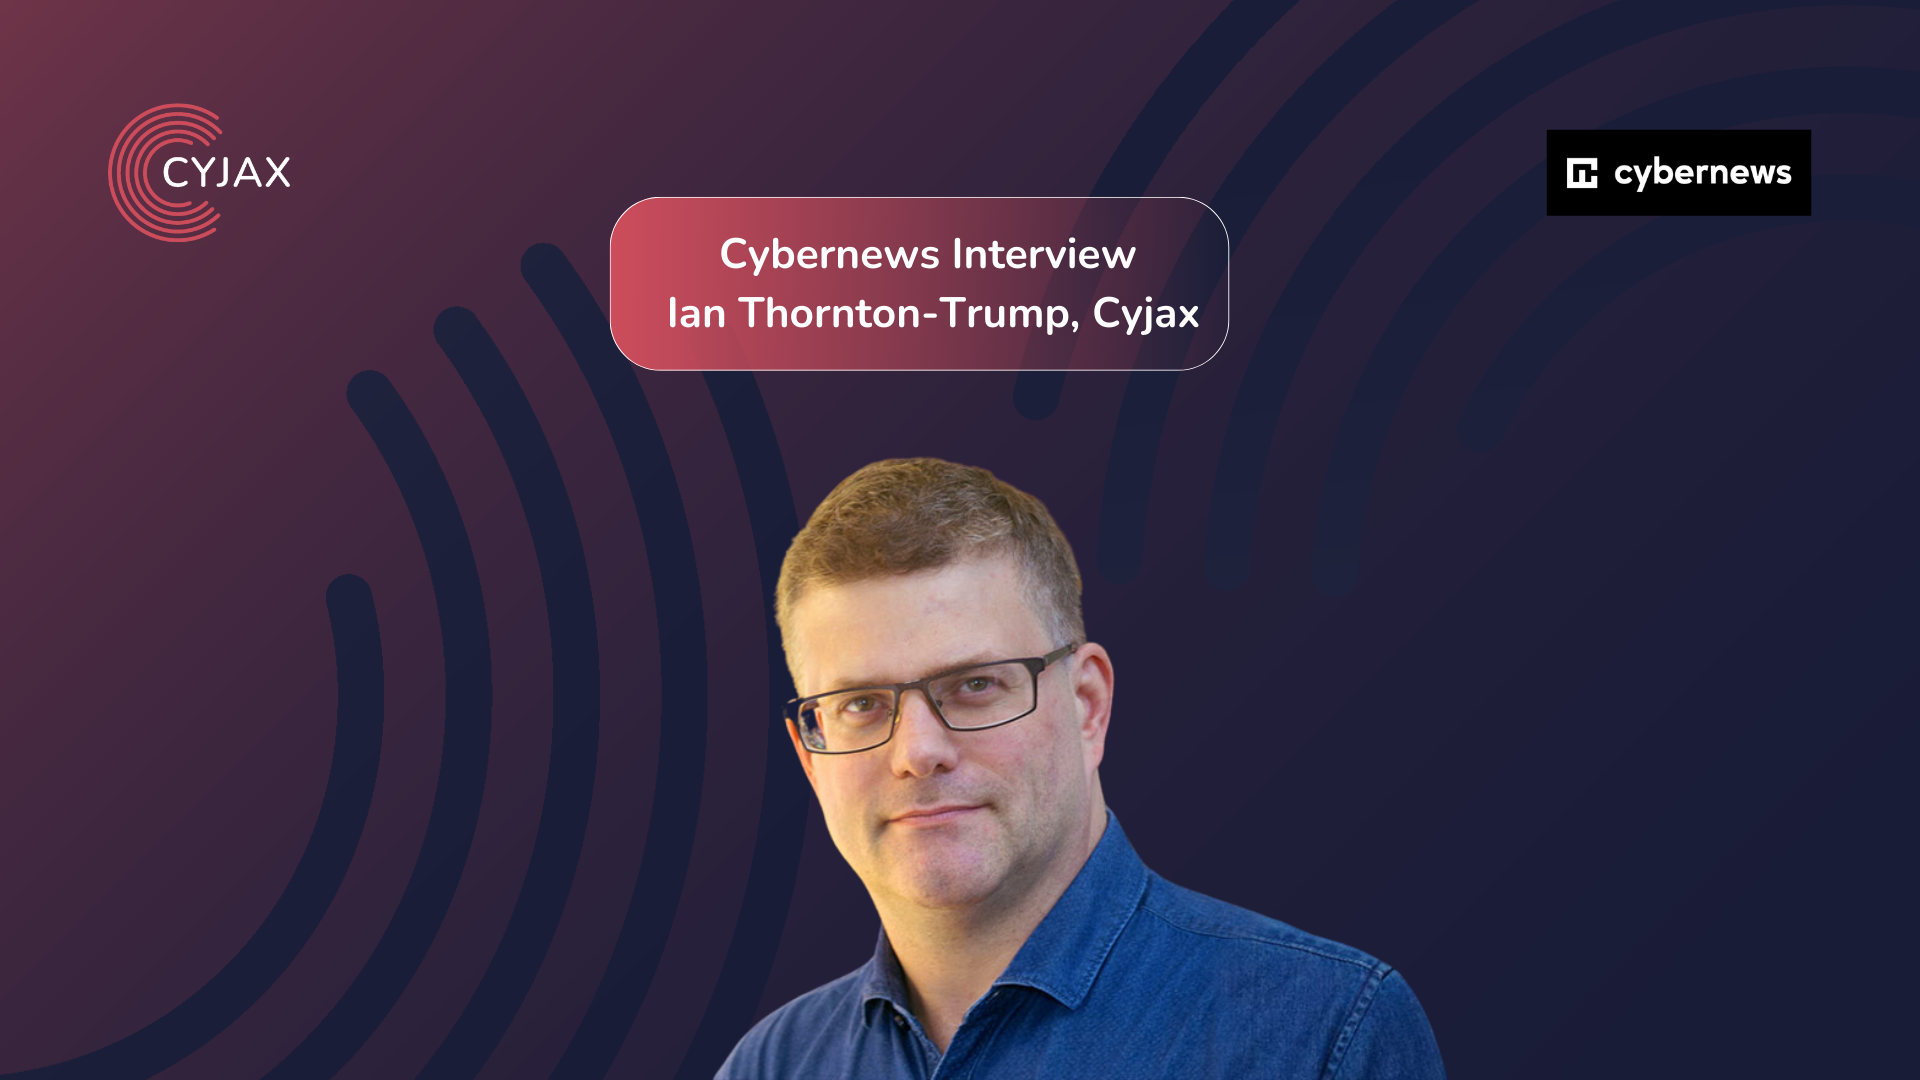 Ian Thornton-Trump, Cyjax: “Know your attack surface, and start to use intelligence to understand what threats are most relevant to your business”